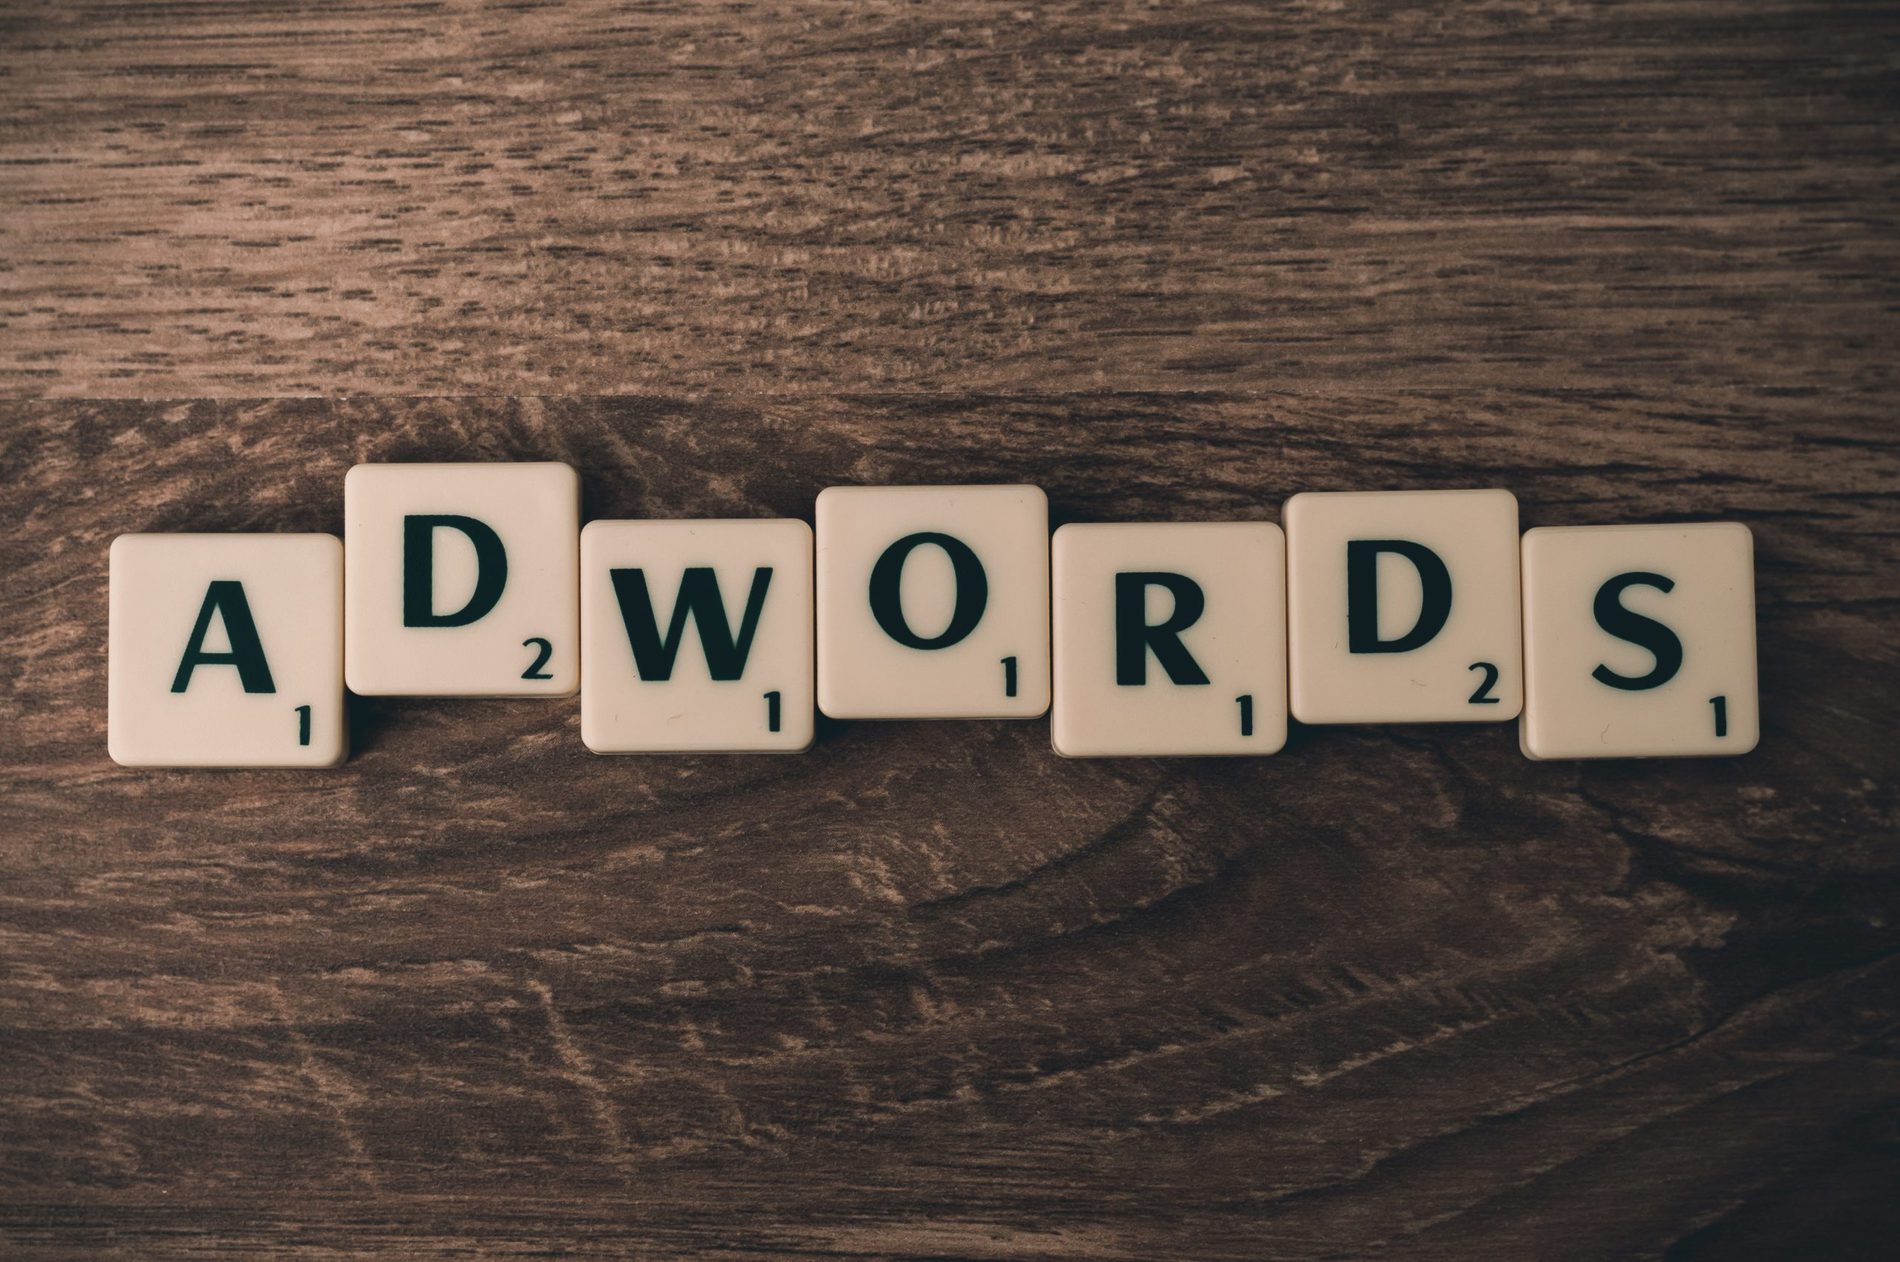 adwords - word spelling on wooden table